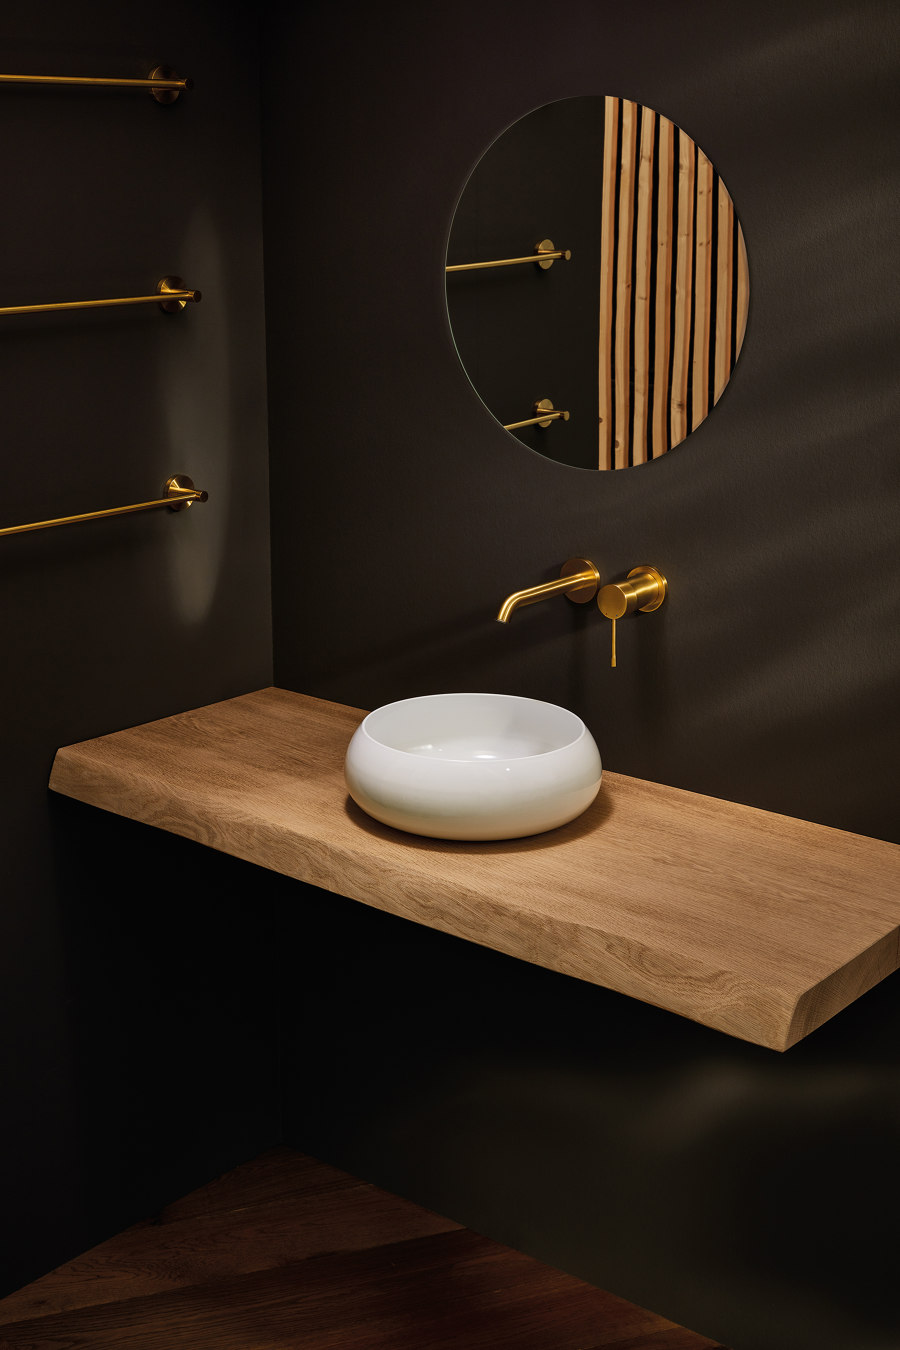 Everything flows: Baths from BETTE | Novedades